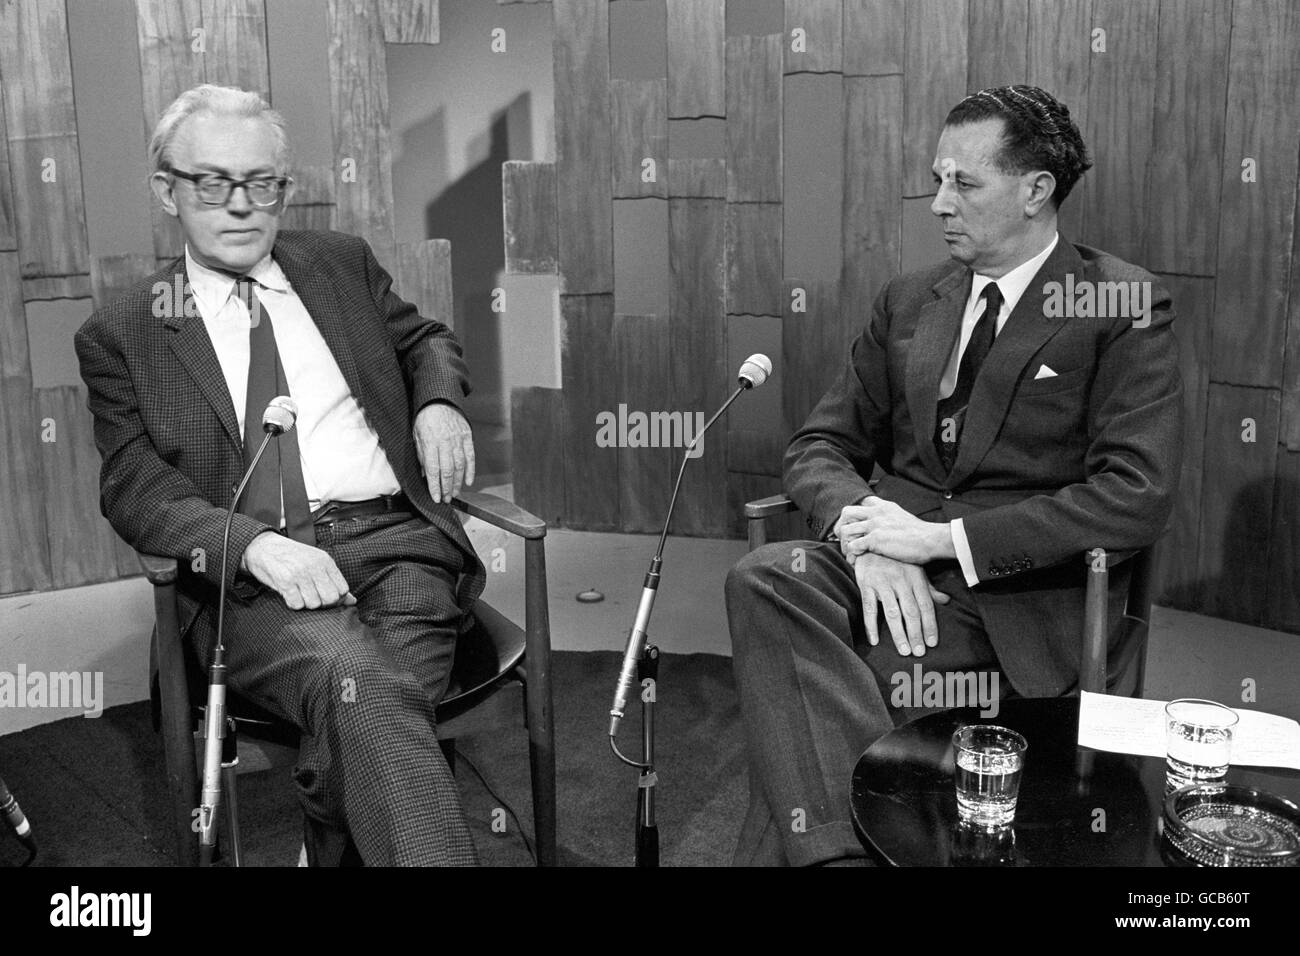 Mr Michael Foot (l) Shadow Minister of Power and Sir Keith Joseph, Secretary for Social Services, pictured when they appeared on Thames TV's 'To-day' programme. Asked about Mr (Ted) Heath's performance as Prime Minister Mr Foot replied 'i think he is a vain, pig-headed catastrophe'. Sir Keith described Mr Heath as 'Absolutely first class to work with. He has a general strategy to achieve a combination of prosperity and service to people who most need help'. Stock Photo